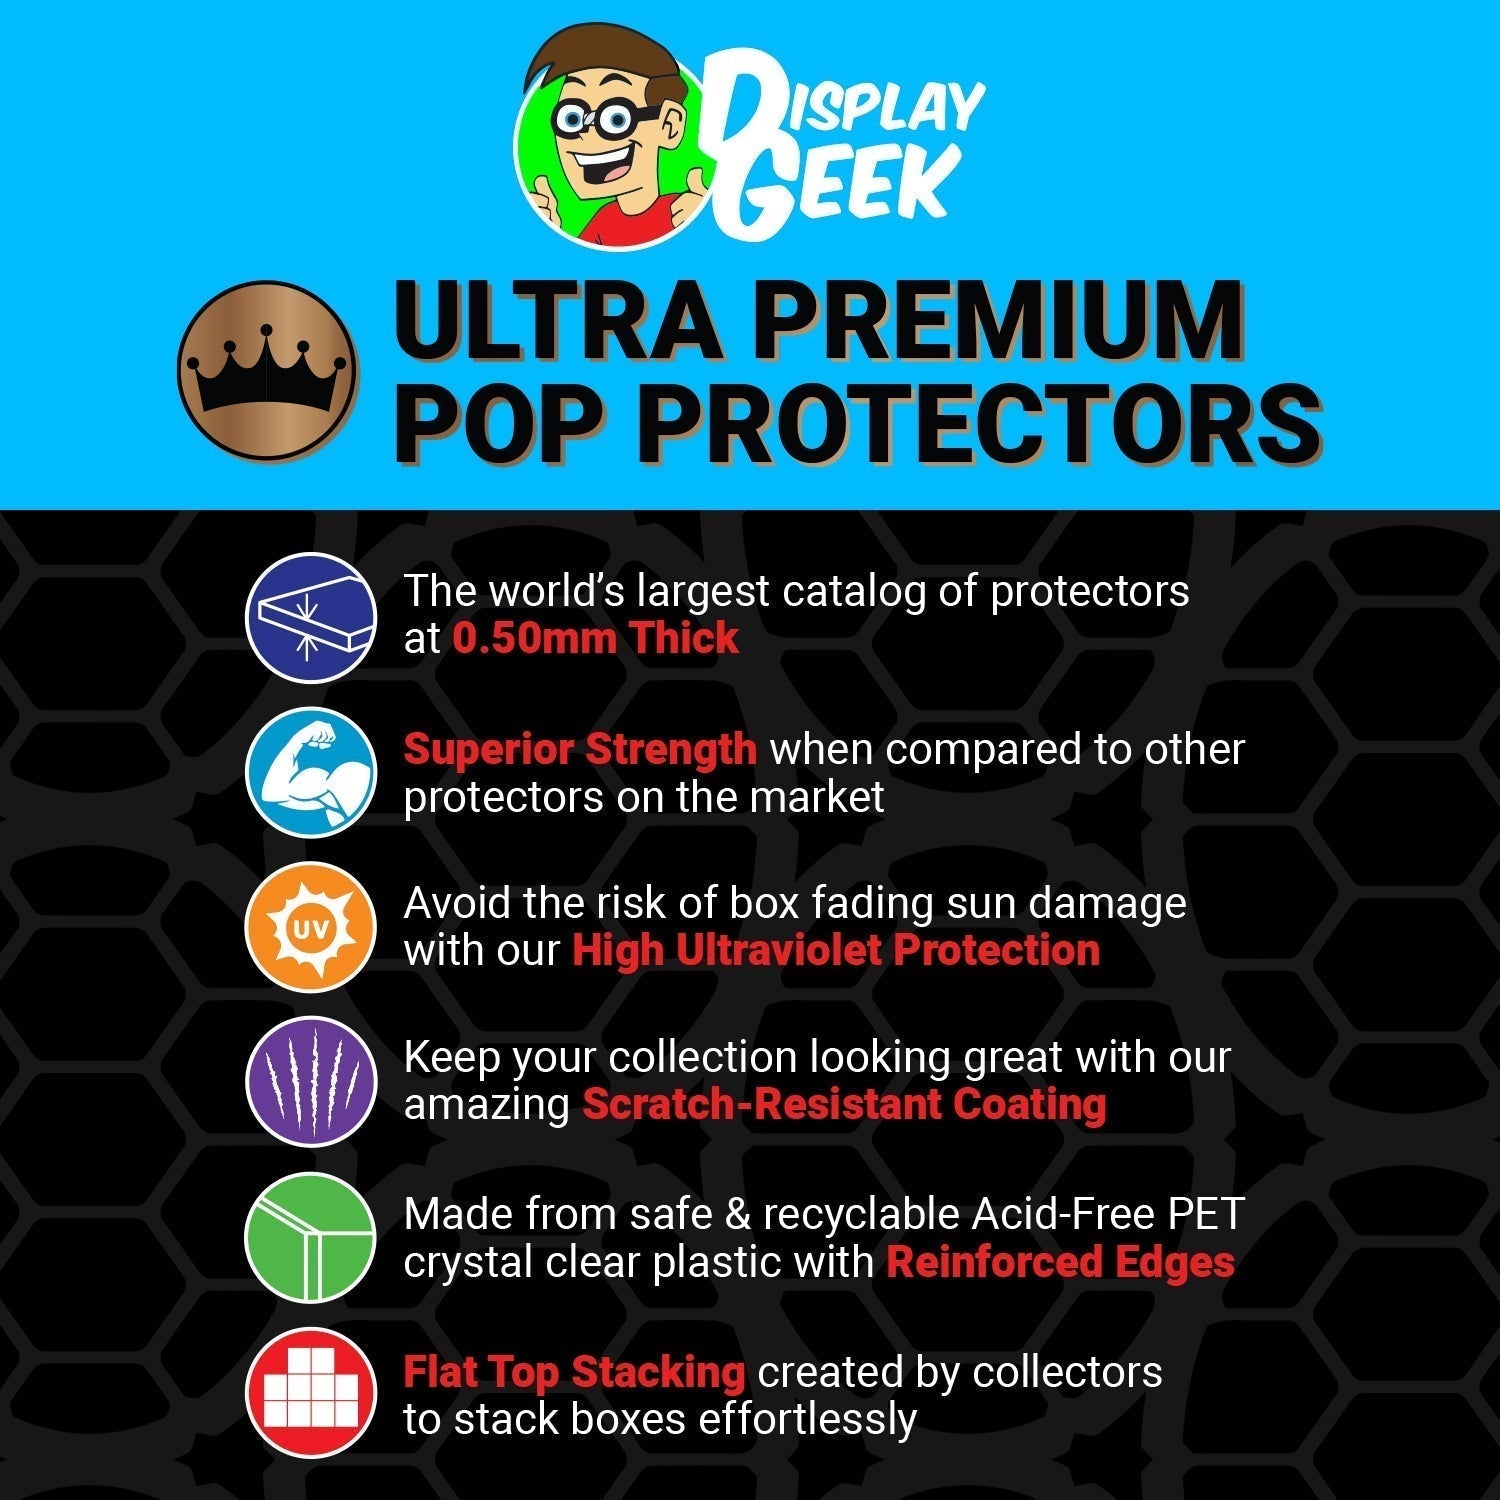 Pop Protector for 2 Pack Aku & Samurai Jack NYCC Funko Pop - PPG Pop Protector Guide Search Created by Display Geek